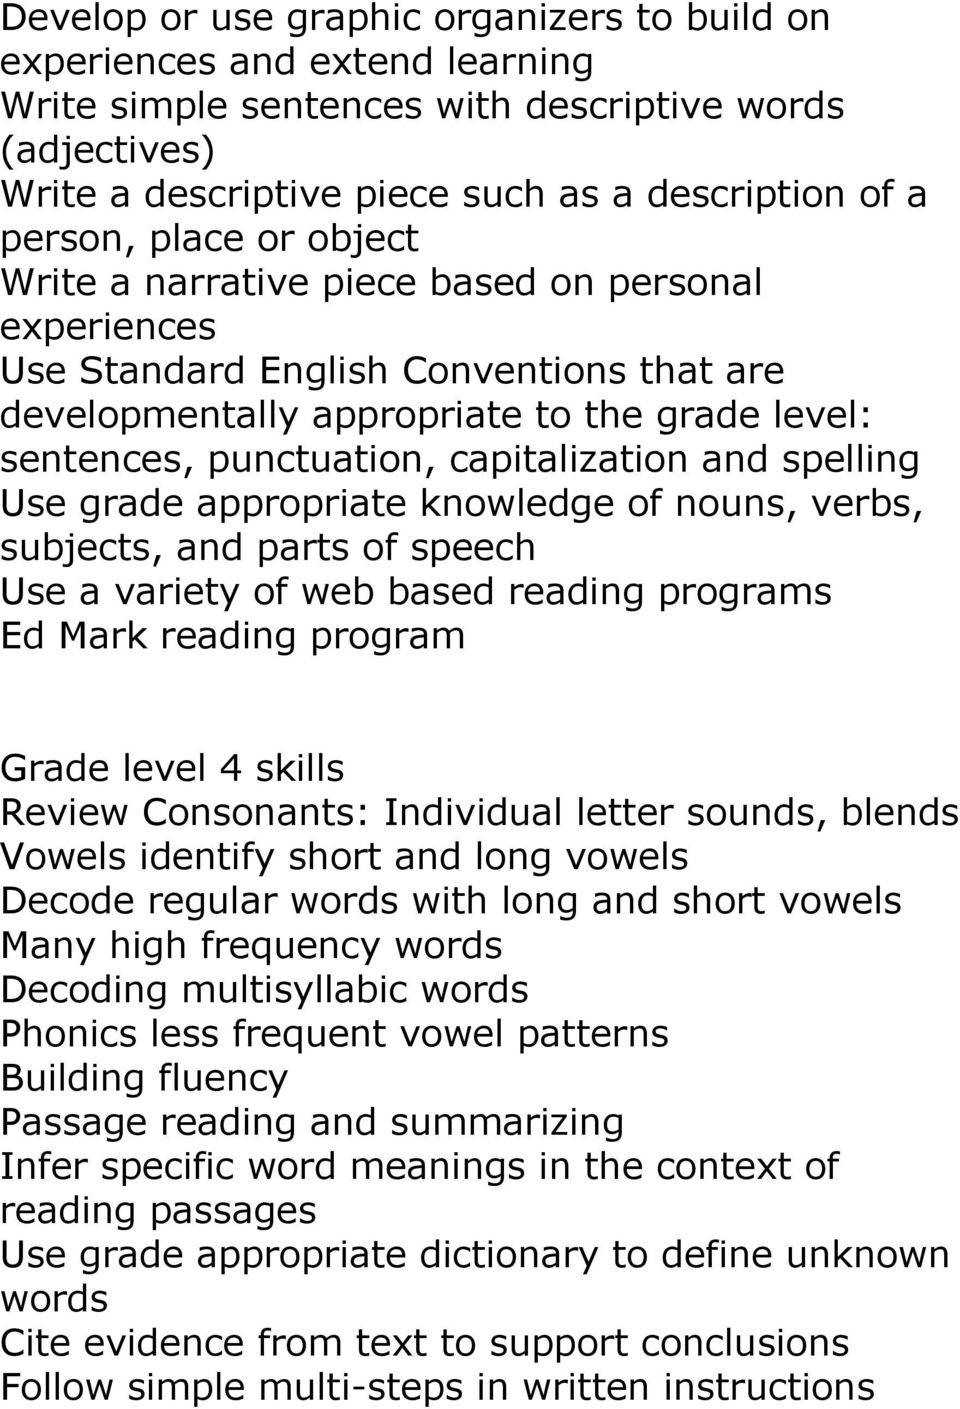 and spelling Use grade appropriate knowledge of nouns, verbs, subjects, and parts of speech Use a variety of web based reading programs Ed Mark reading program Grade level 4 skills Review Consonants: